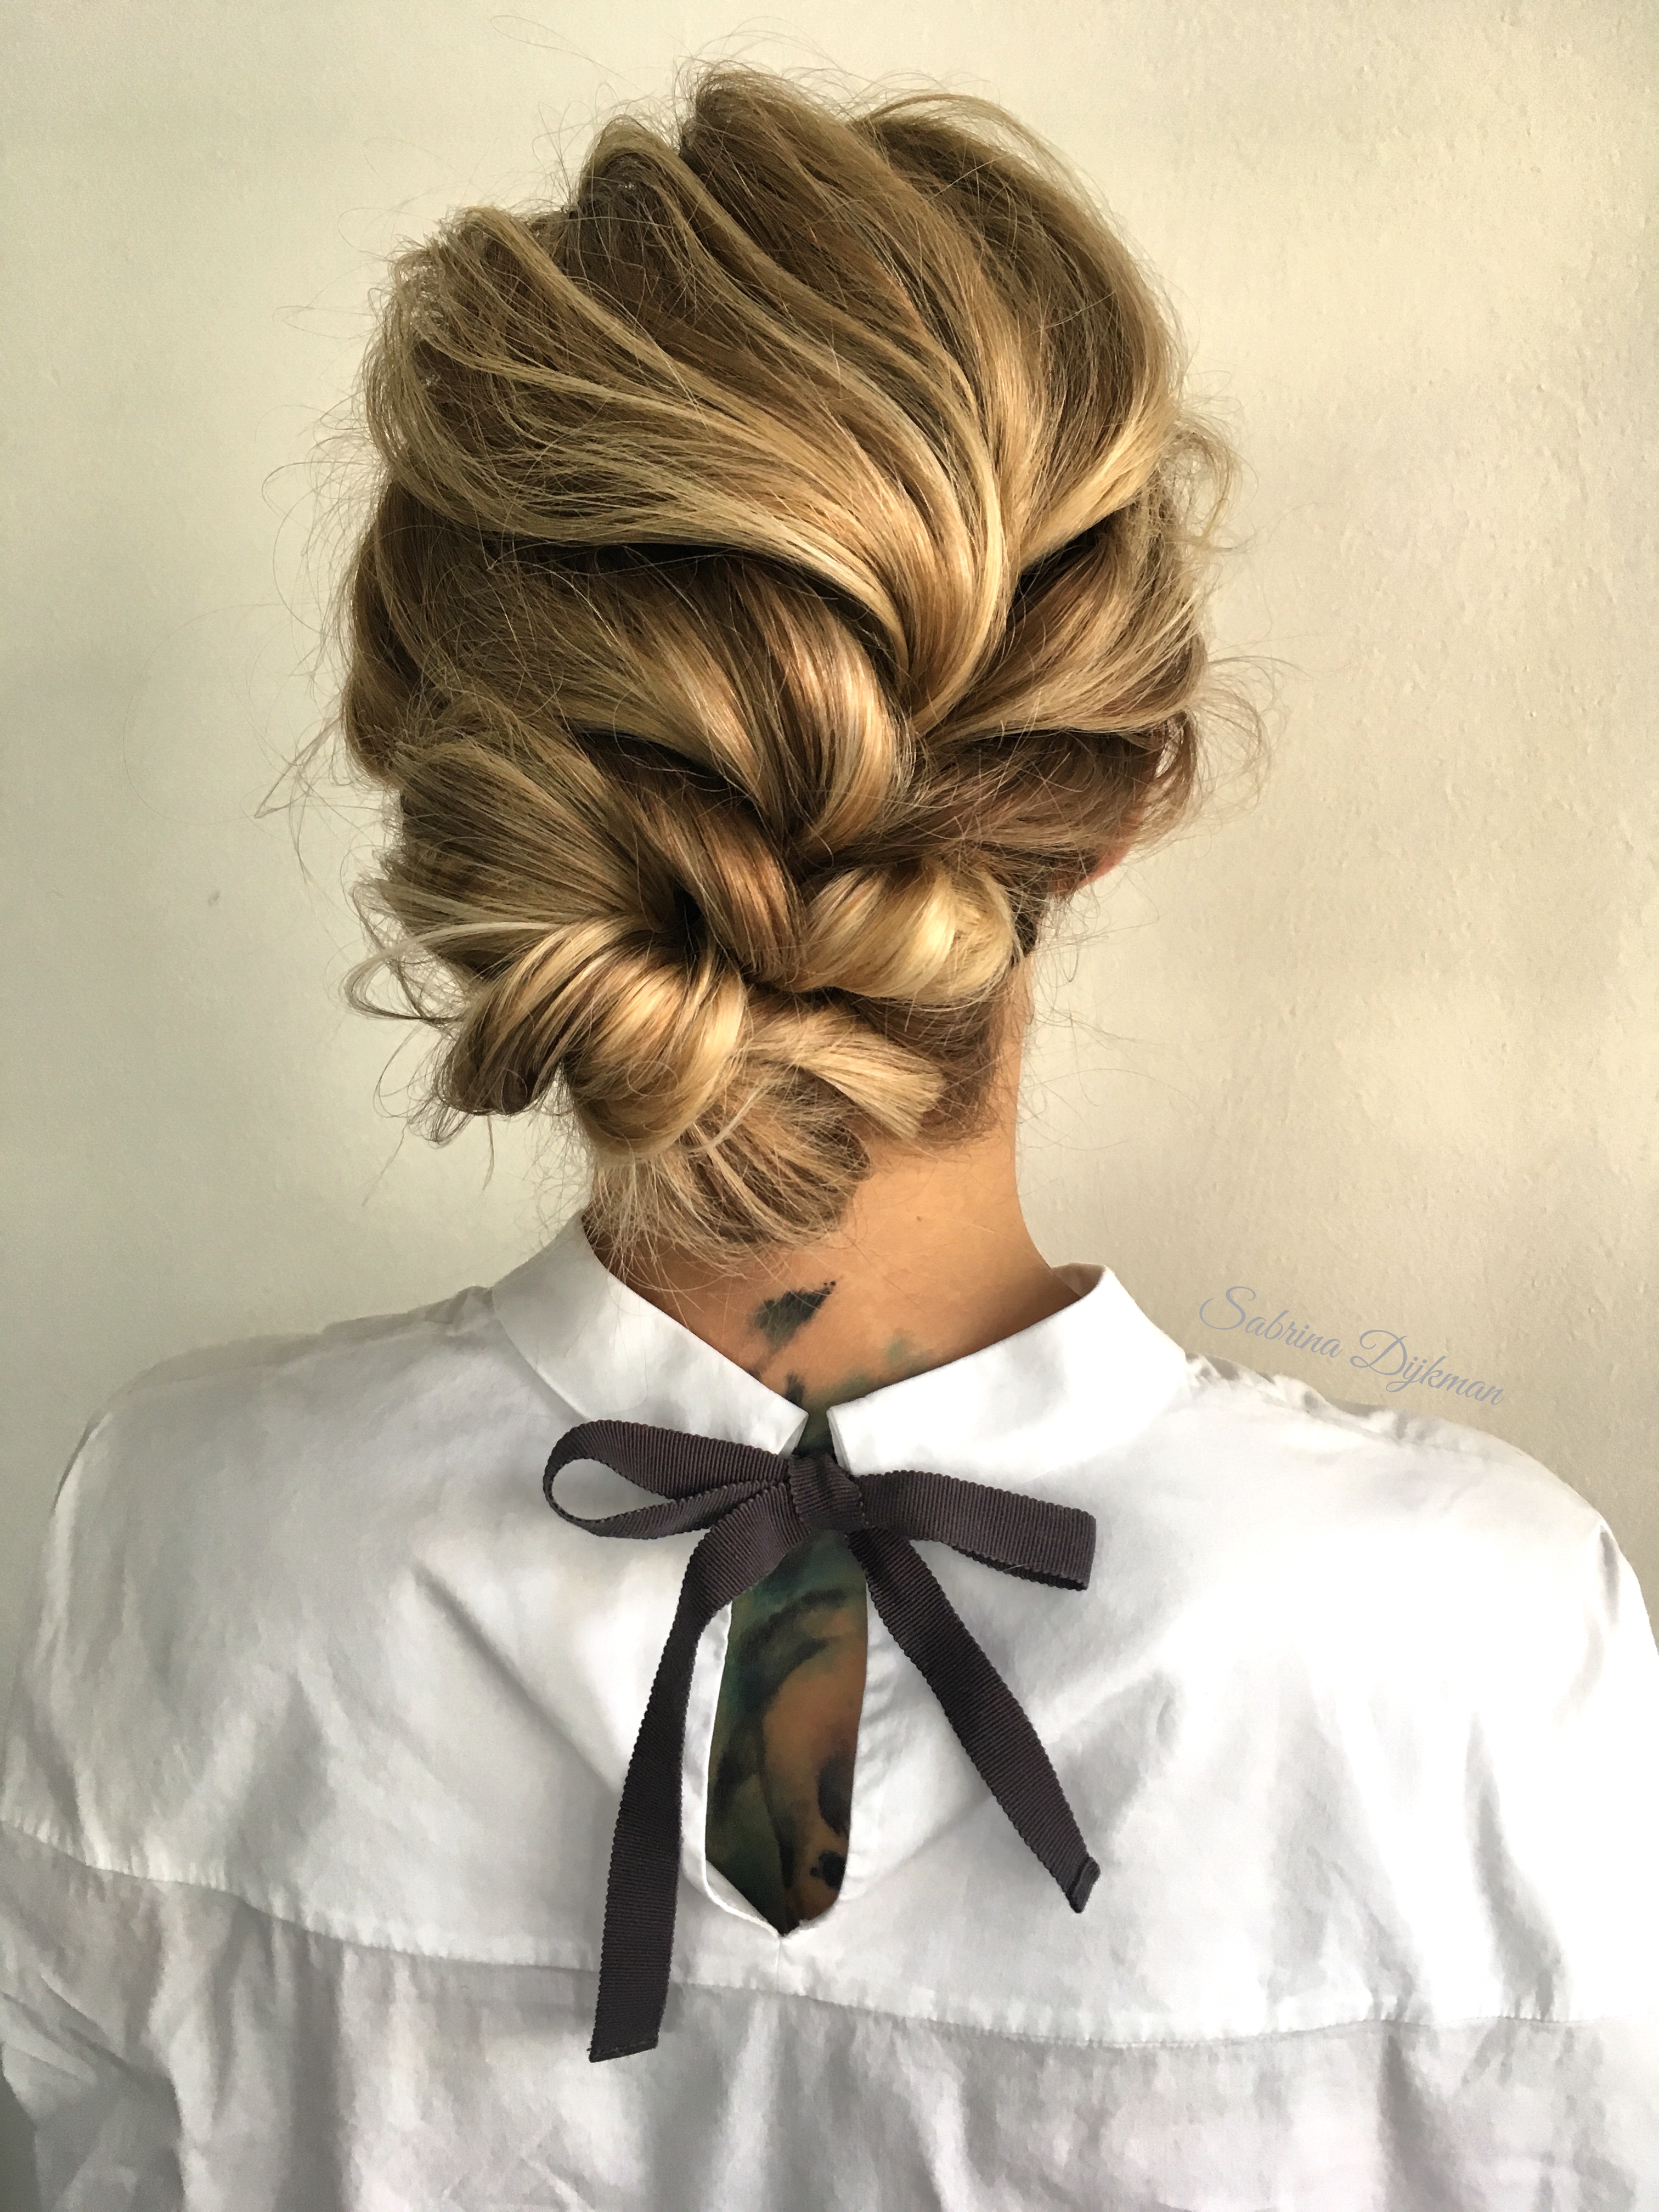 Boho Braided Updo with Weave